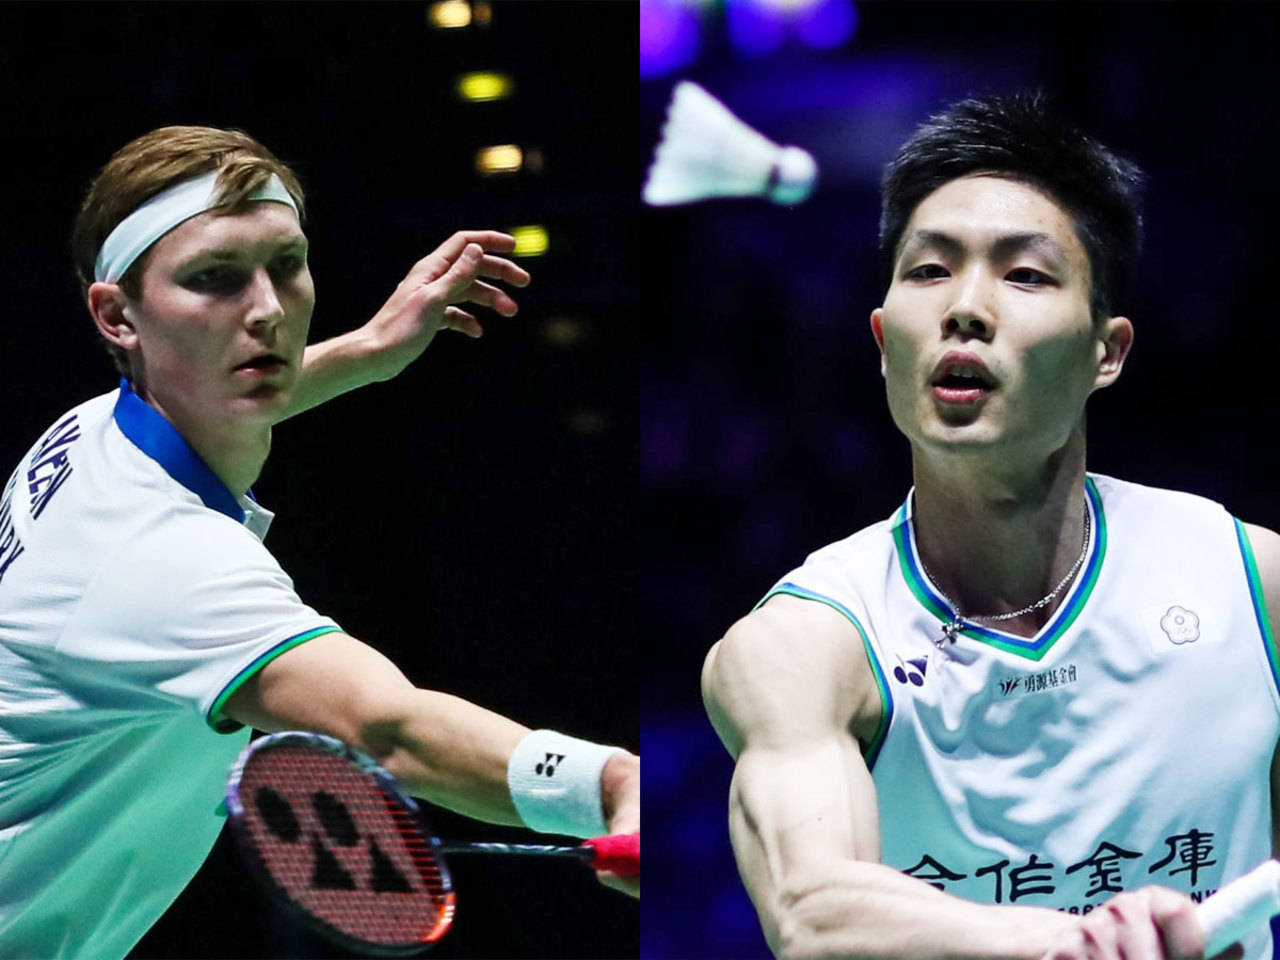 Taiwans Chou Tien-chen to face Viktor Axelsen in All England Championships final Badminton News